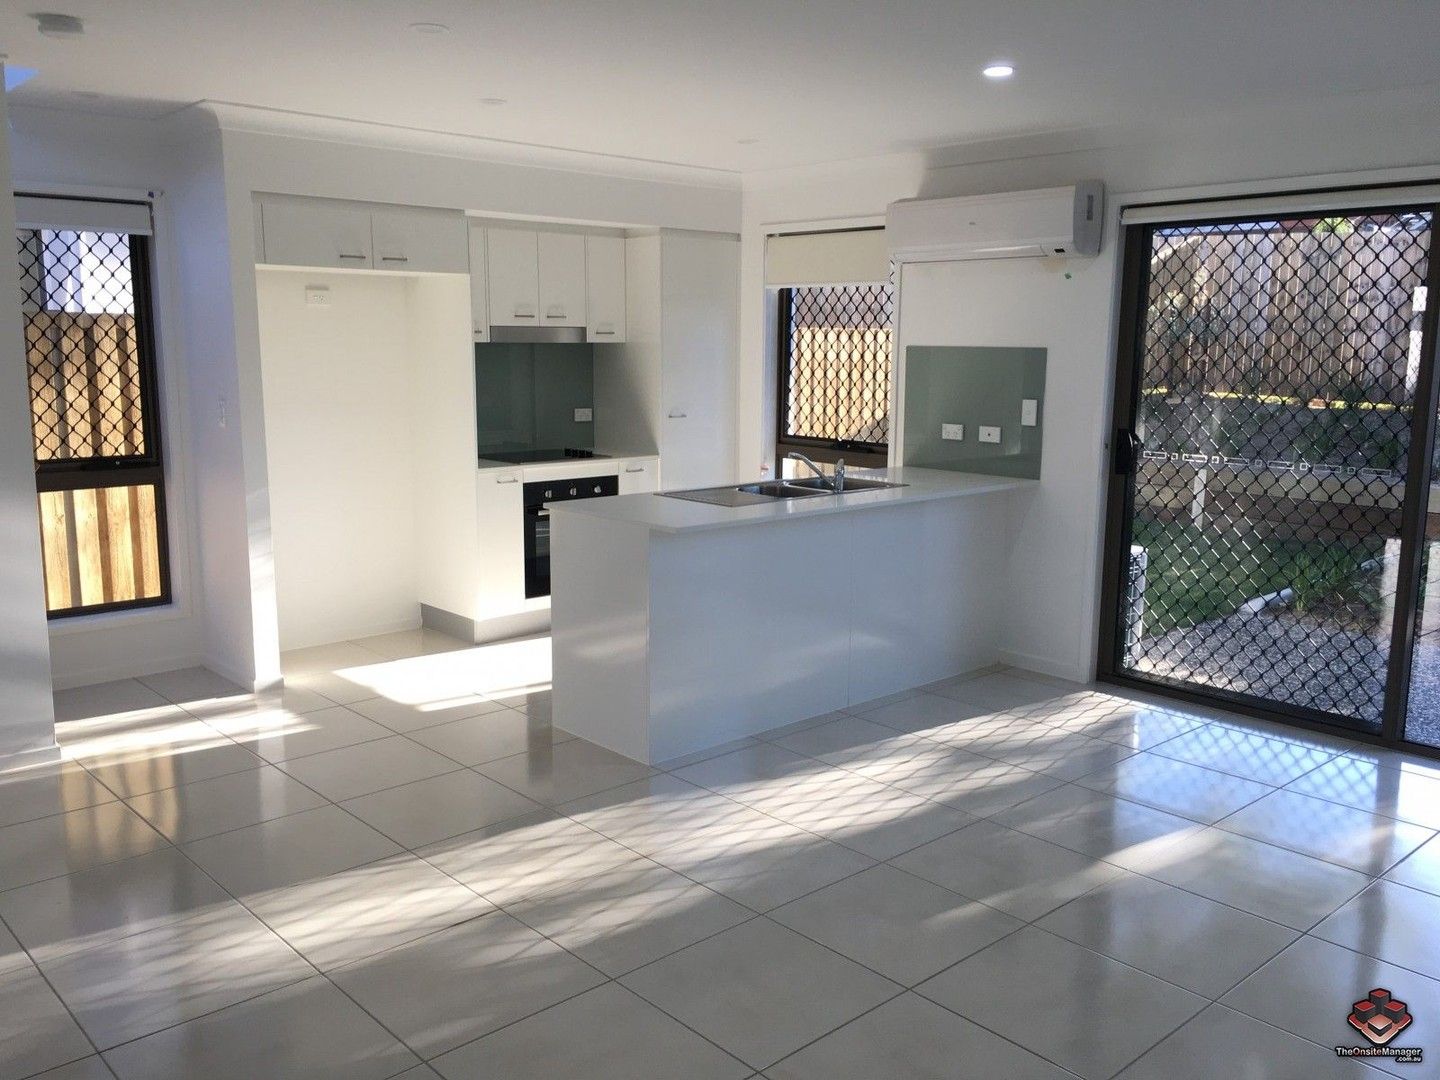 2 bedrooms Townhouse in ID:21086406/54 Grahams Road STRATHPINE QLD, 4500